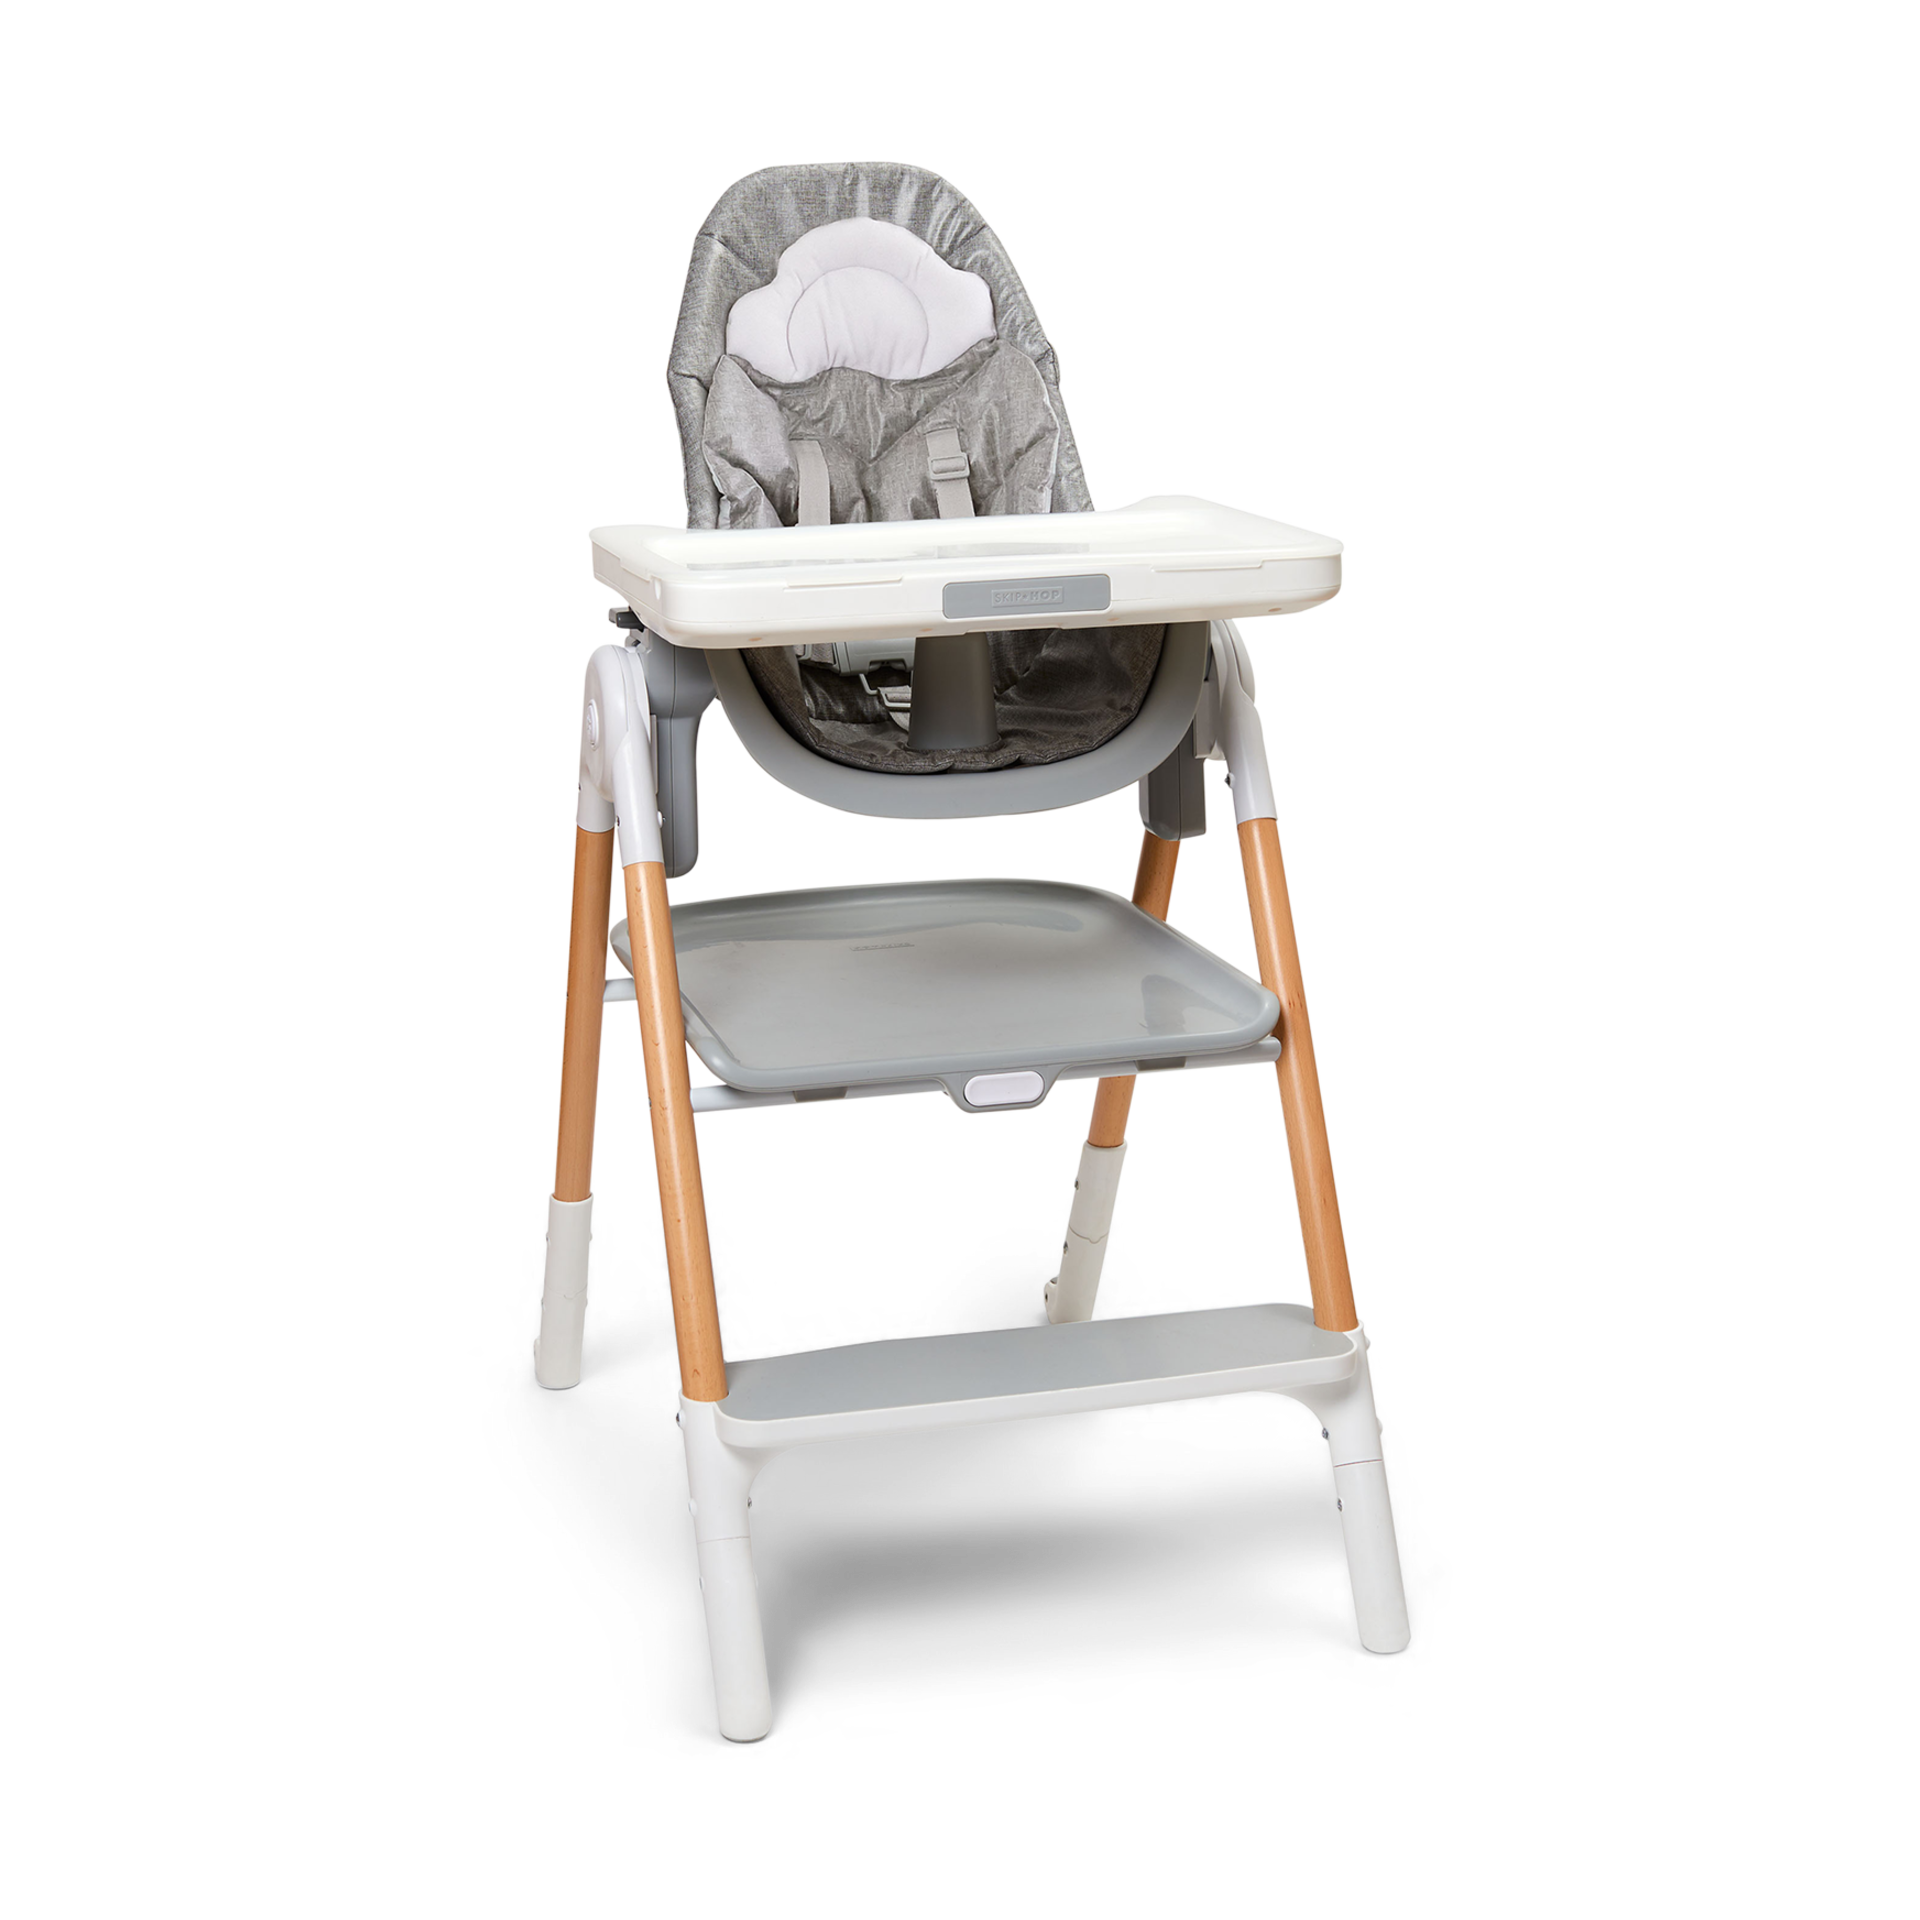 low profile high chair